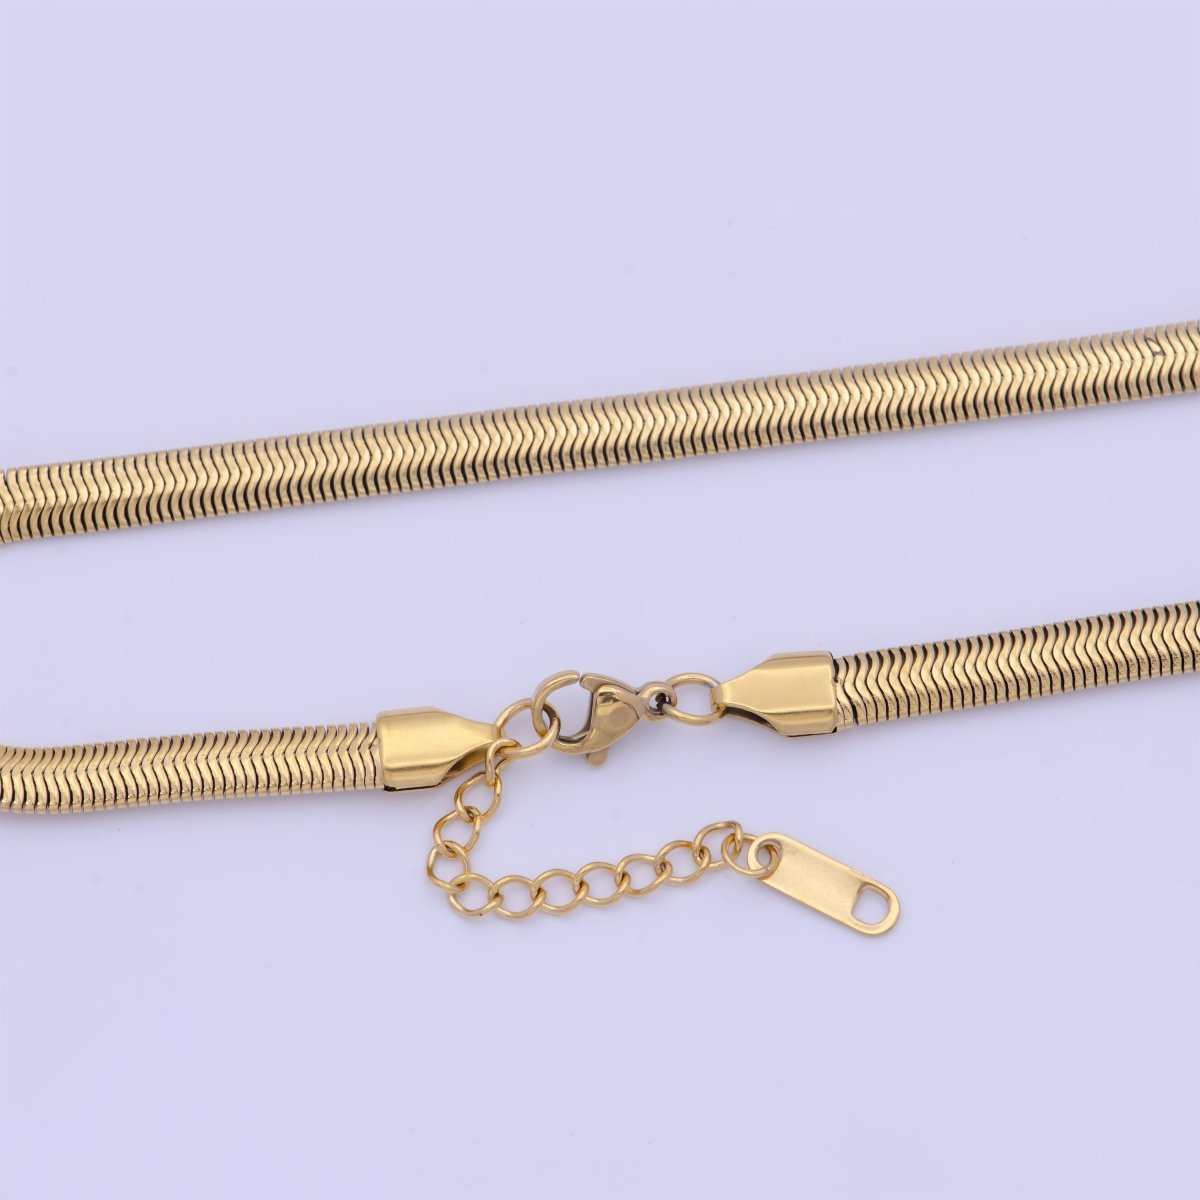 Gold Filled Stainless Steel 7 Inch + 1 Inch Extender Herringbone Snake Chain Bracelet Anklet in Gold & Silver | WA-1142 WA-1143 Clearance Pricing - DLUXCA